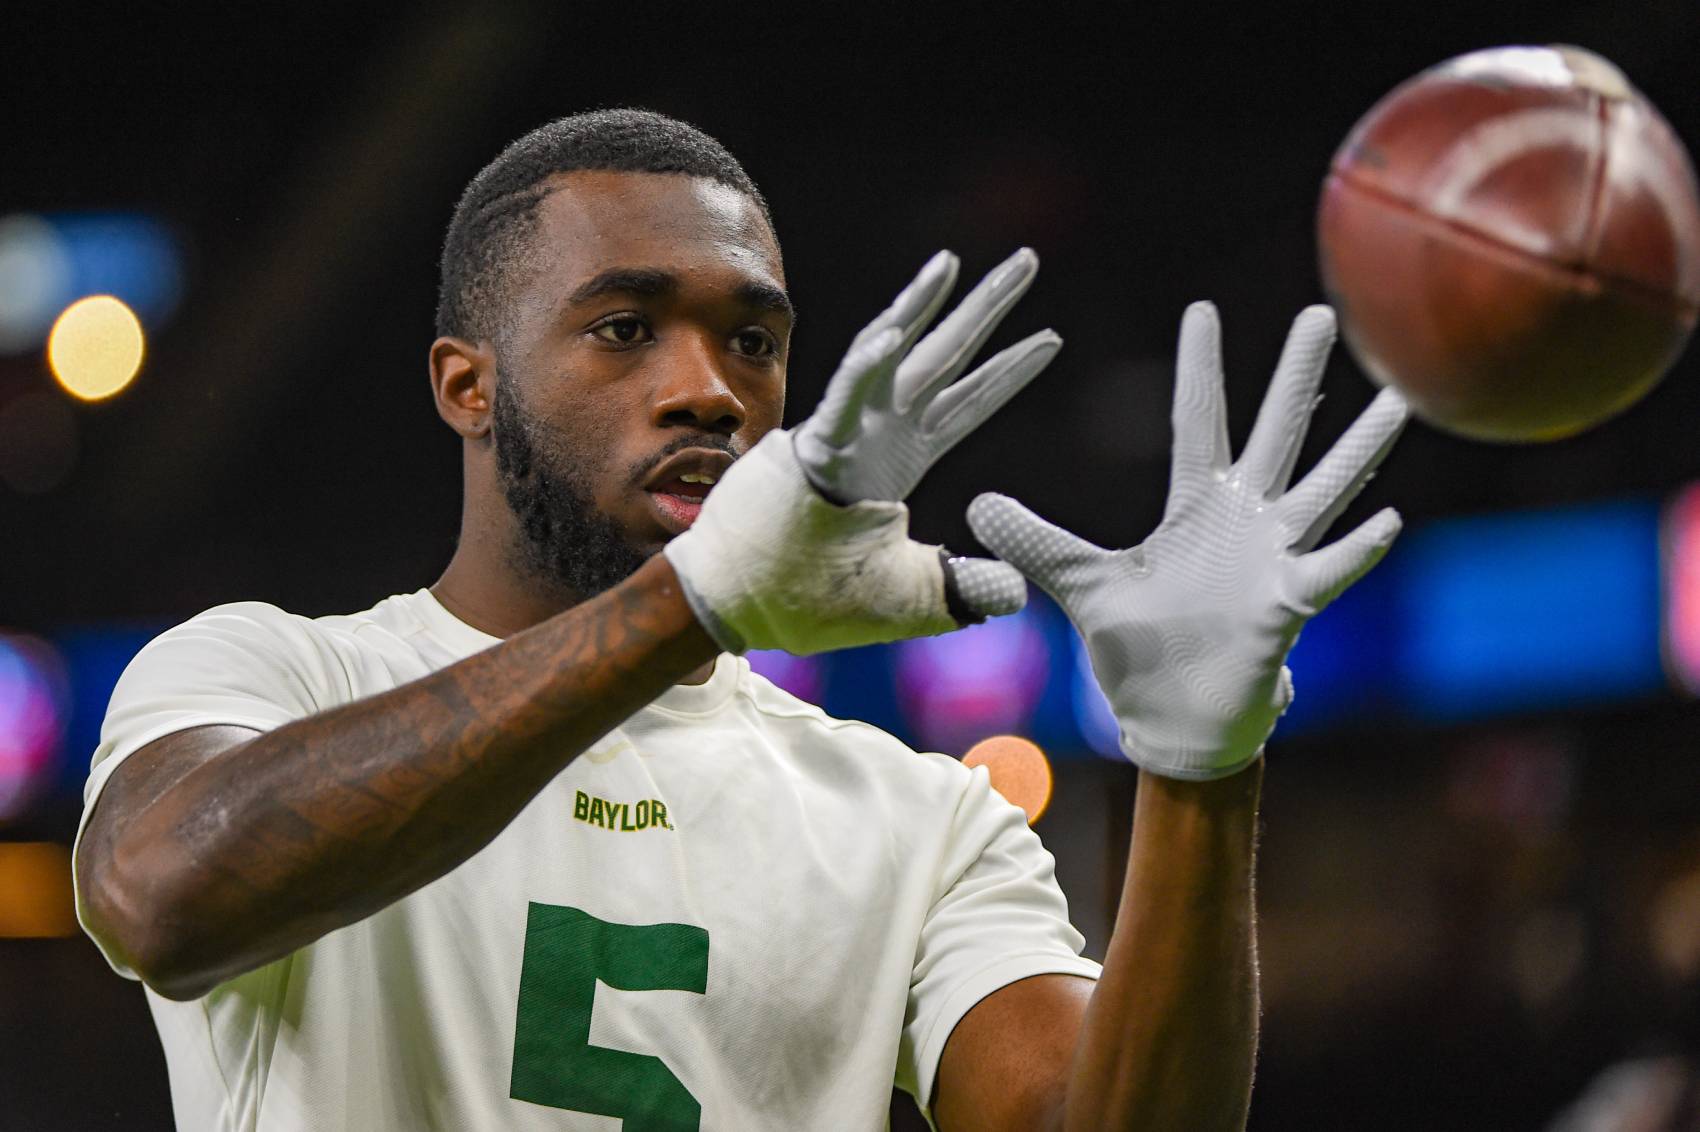 Former Baylor receiver Denzel Mims, now a rookie with the New York Jets, made unfavorable comments about the Philadelphia Eagles on Instagram.